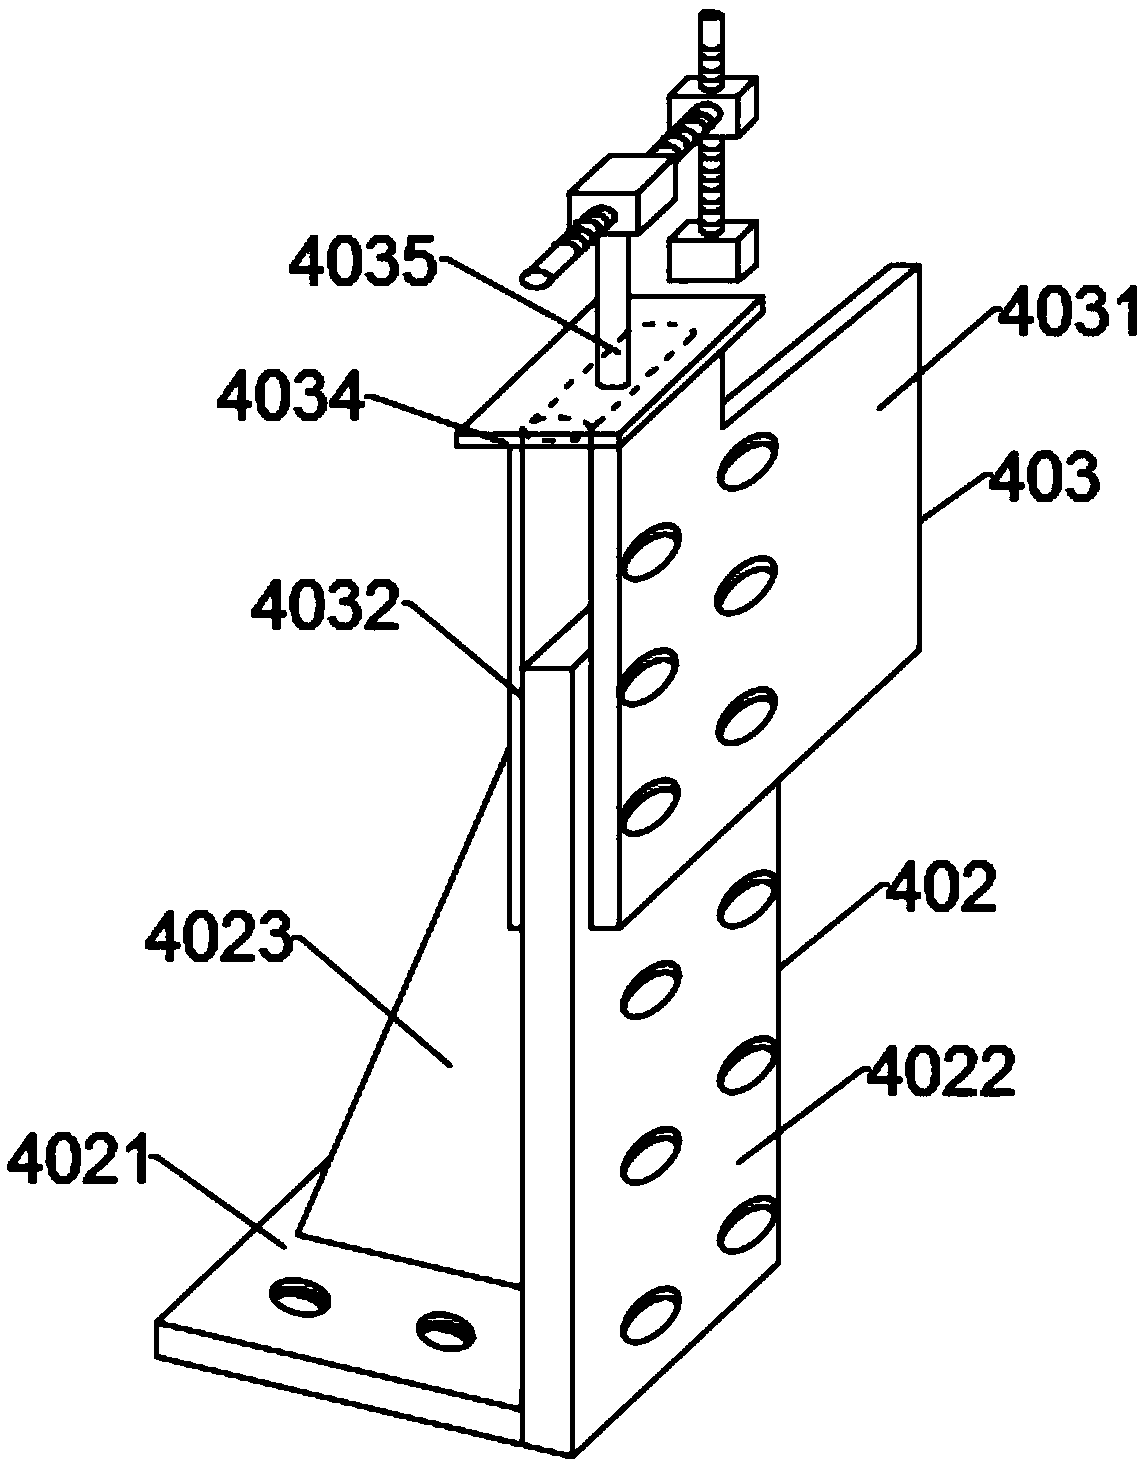 Three-dimensional positioning tool of vehicle base plate welding assembly